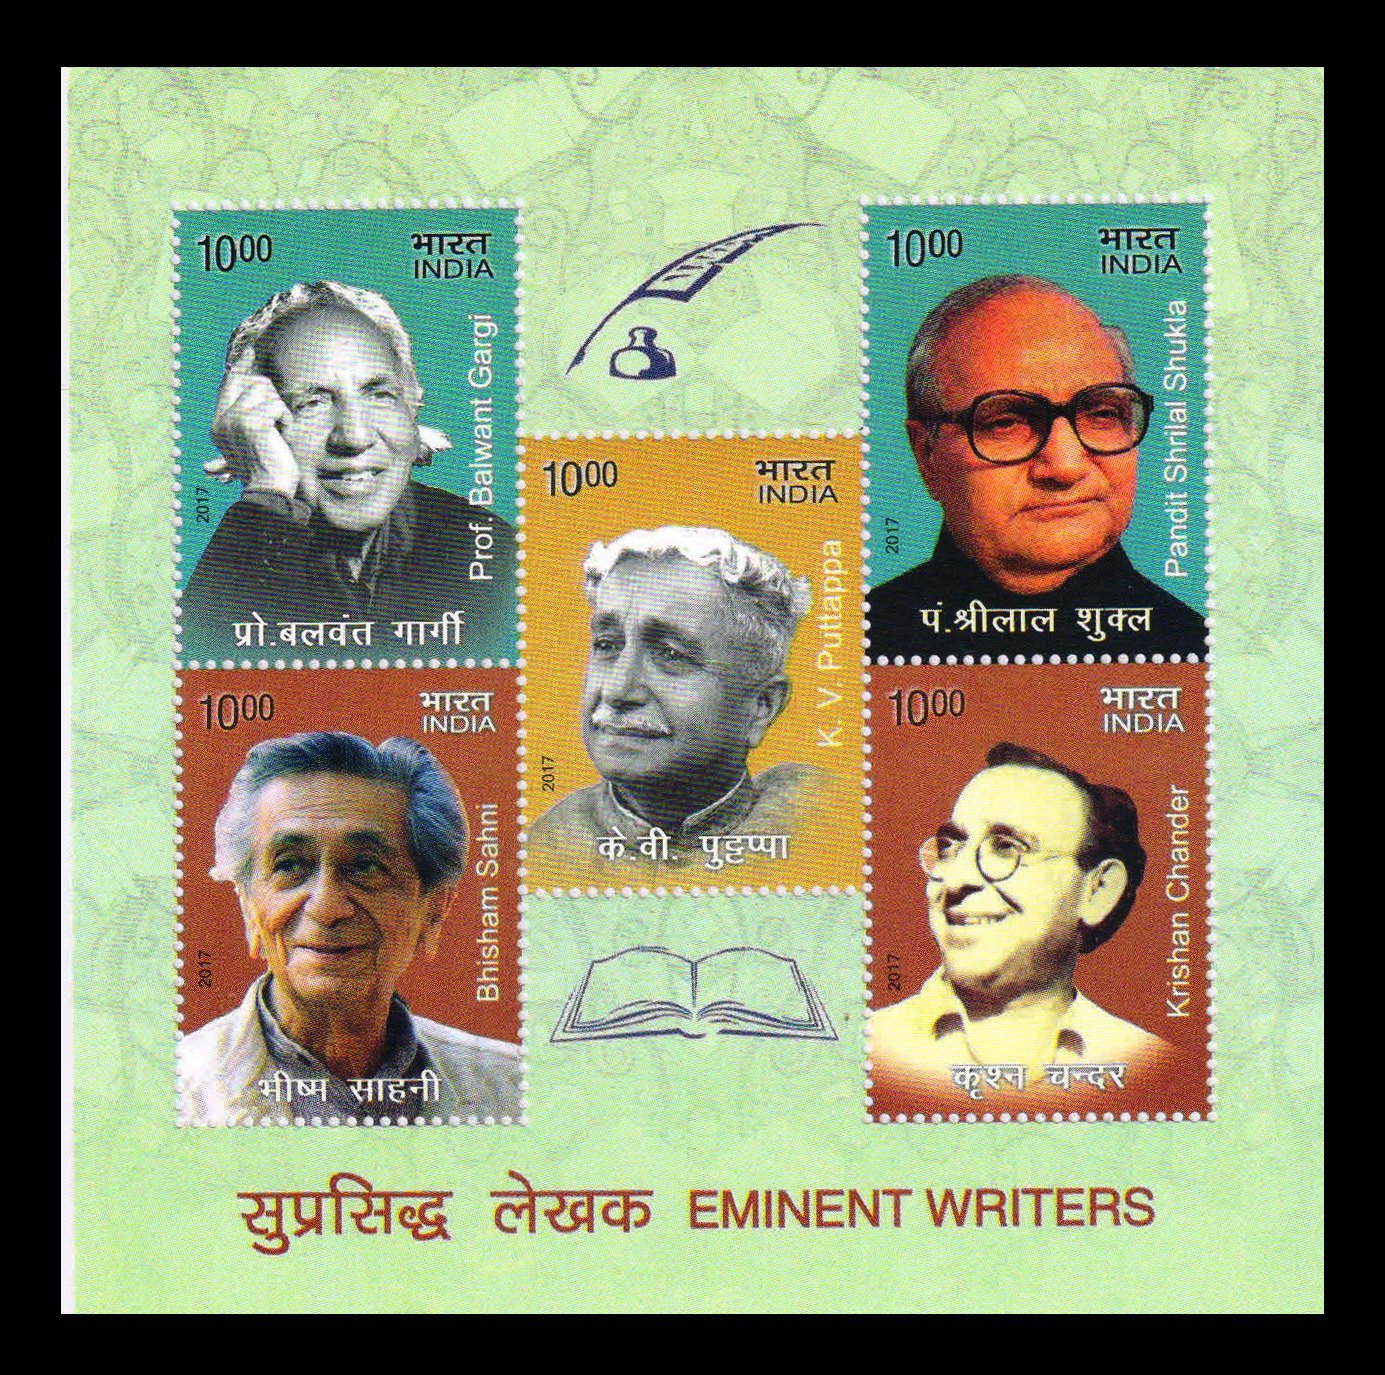 INDIA 2017 - Eminent Writers, Miniature Sheet of 5 Stamps, MNH